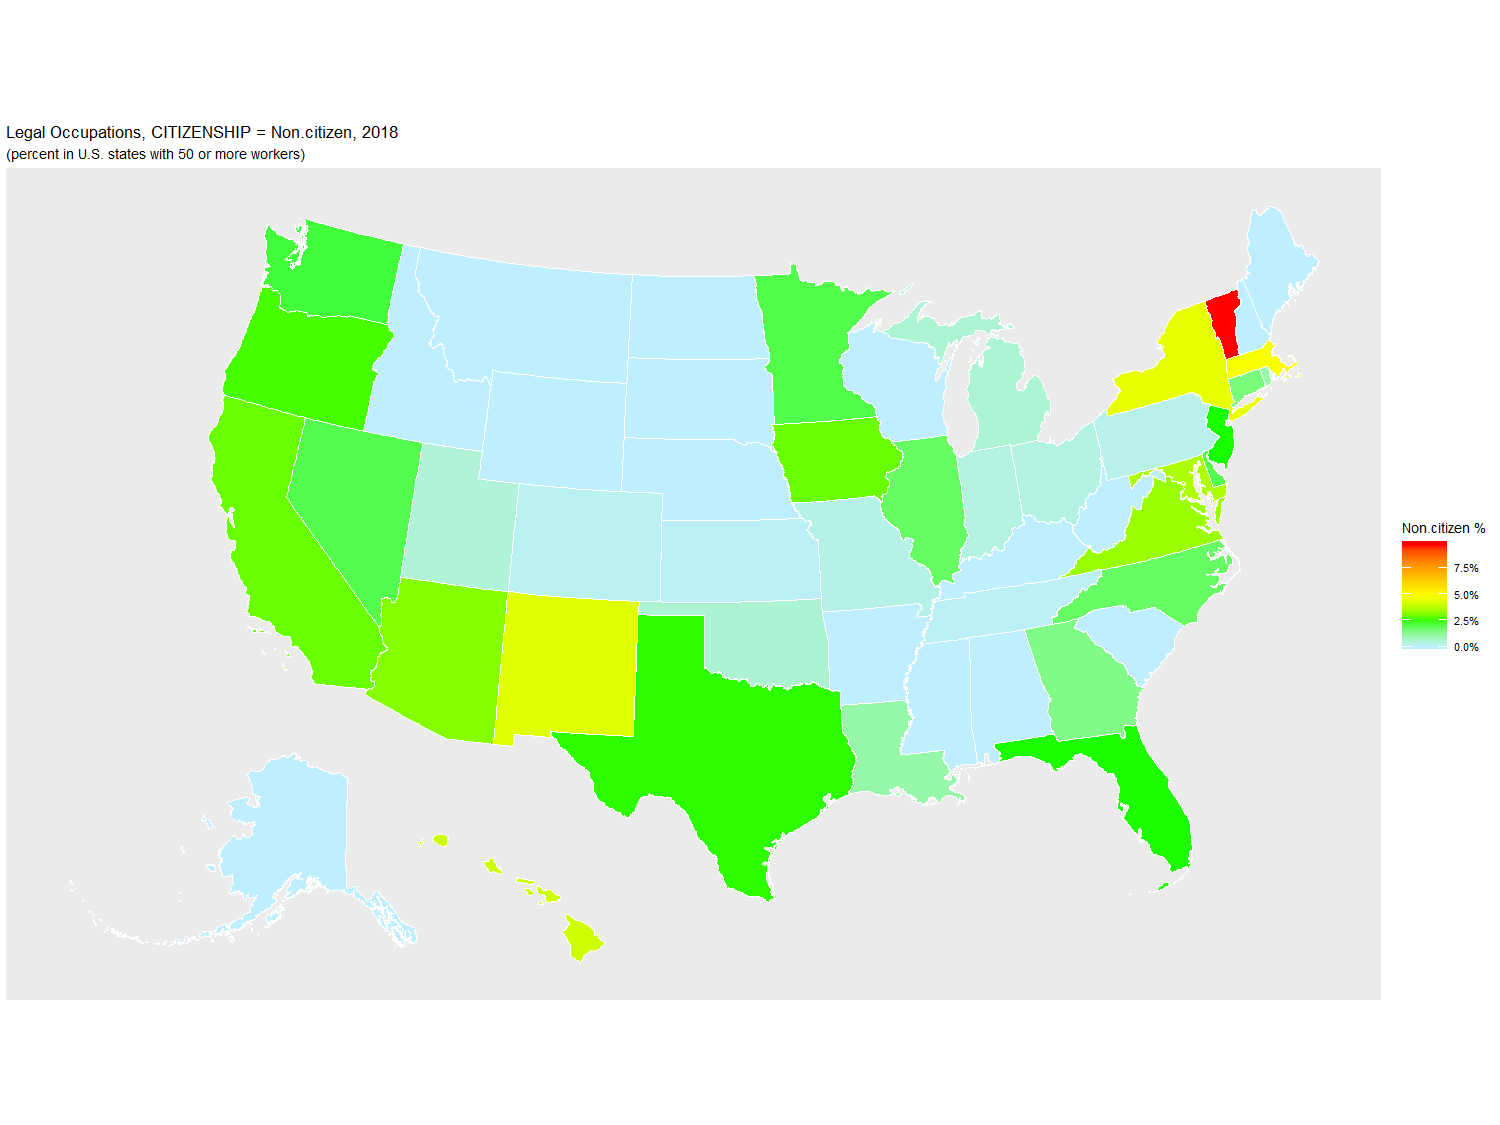 Non-citizen Percentage of Legal Occupations by U.S. State, 2018